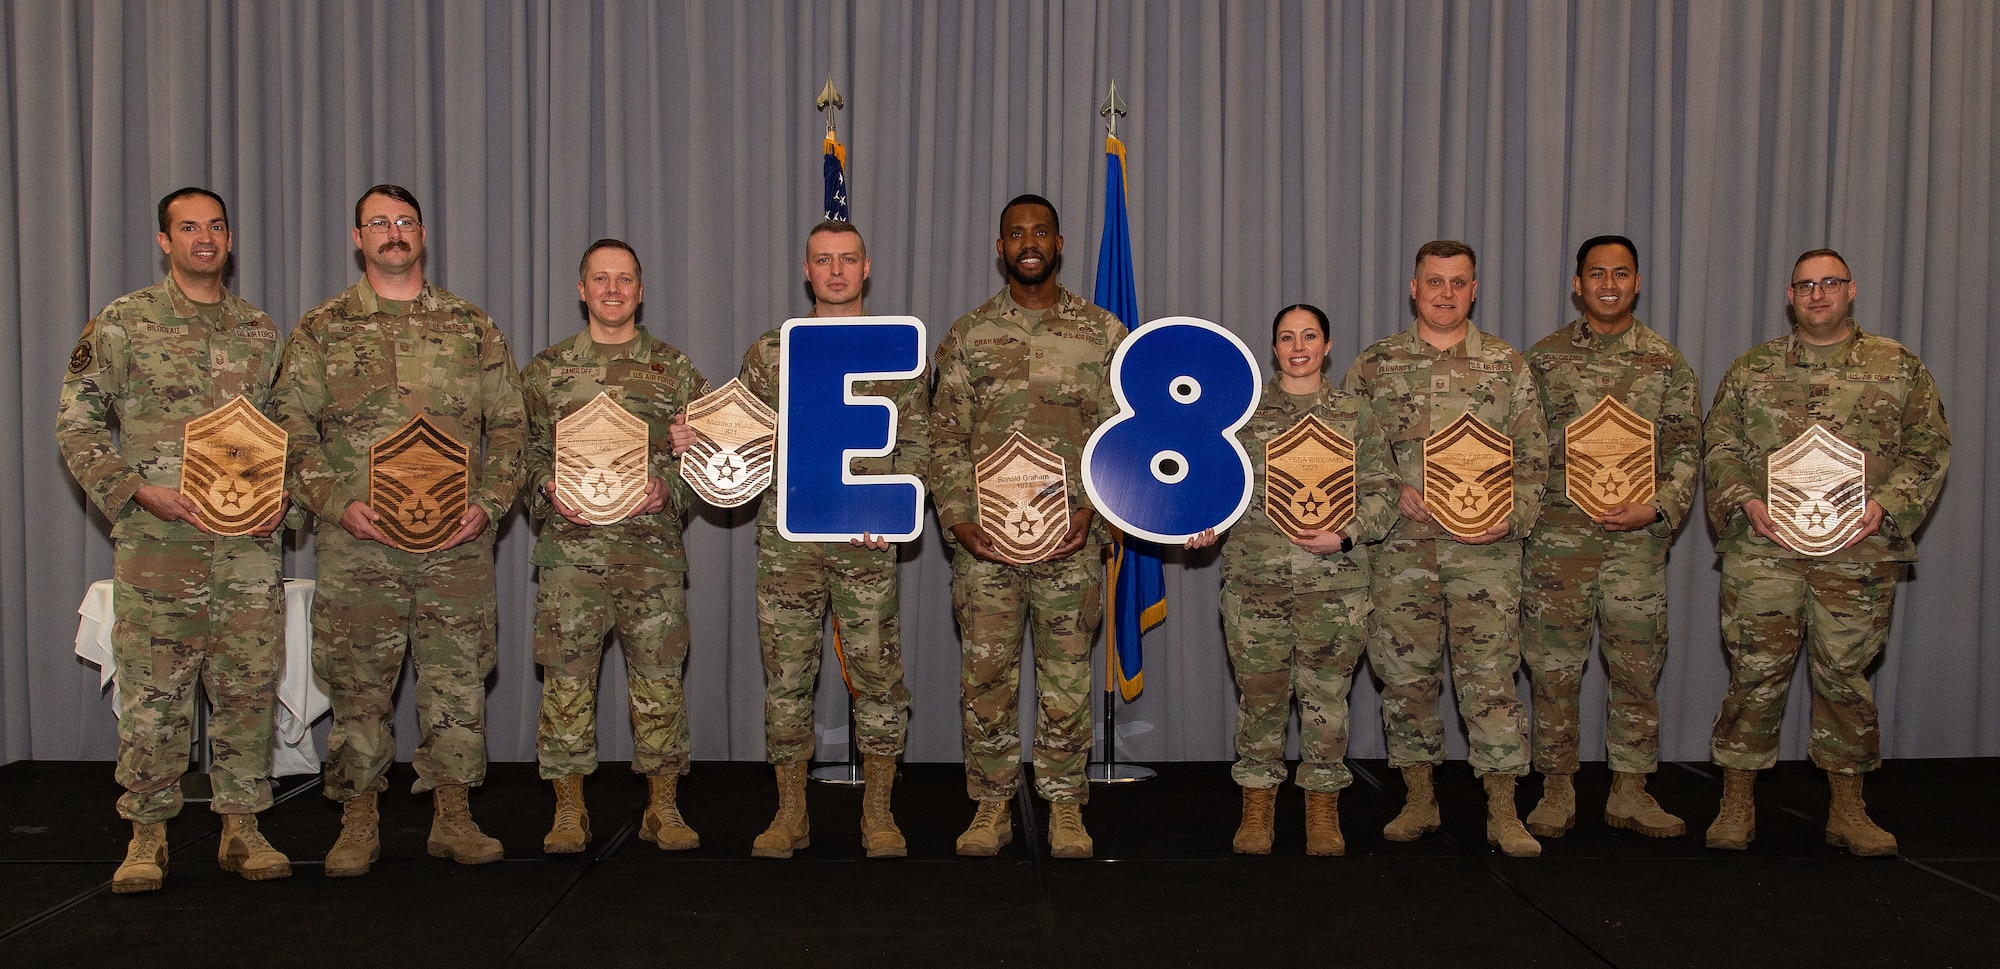 Fourteen selected for promotion to senior master sergeant